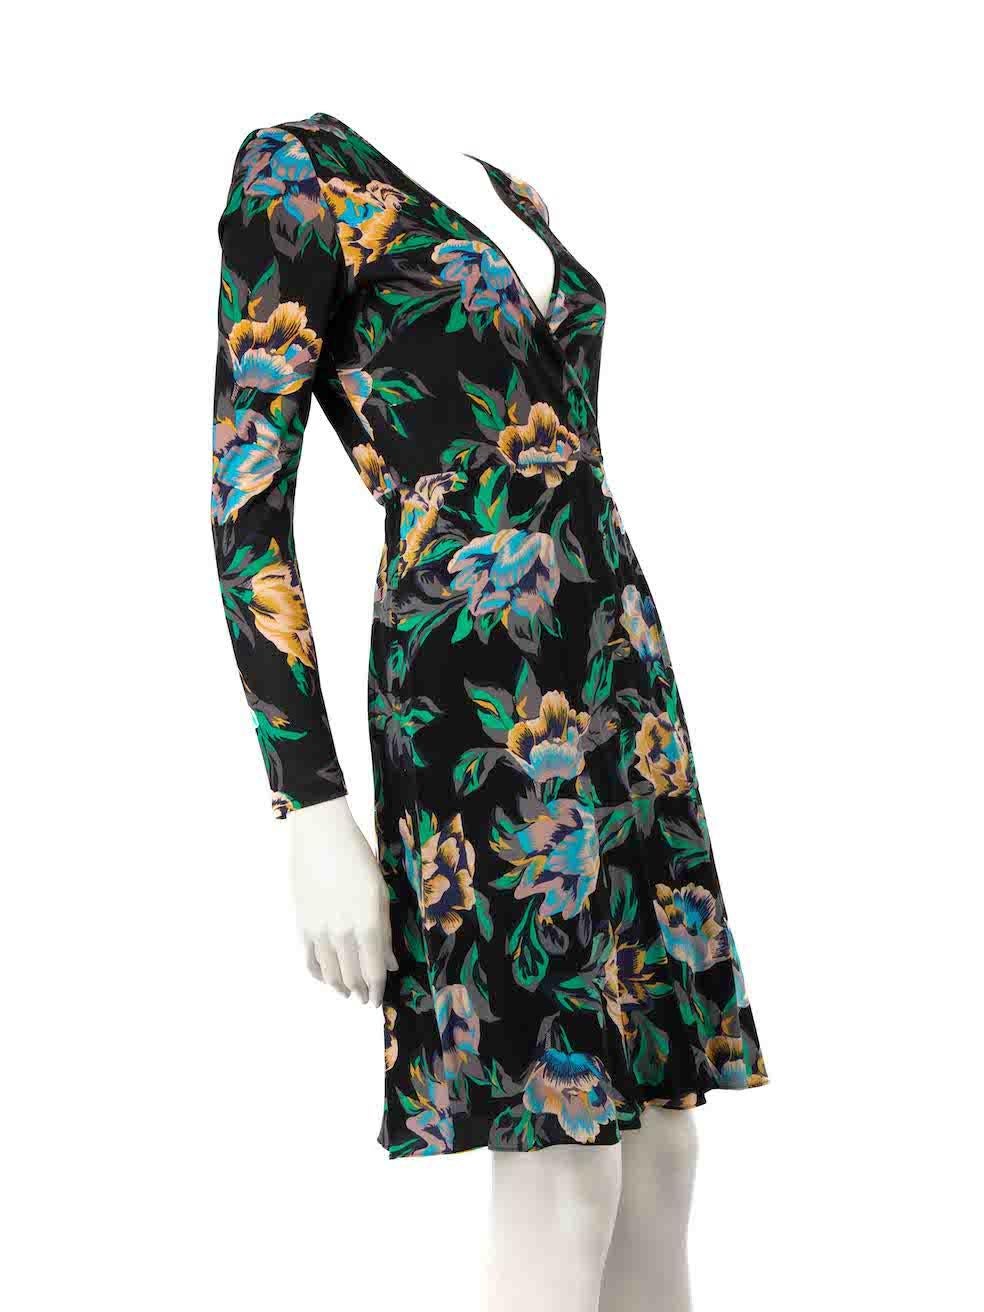 CONDITION is Very good. Hardly any visible wear to the dress is evident on this used Diane Von Furstenberg designer resale item.
 
 
 
 Details
 
 
 Multicolour
 
 Silk
 
 Wrap dress
 
 Floral print
 
 Front tie fastening
 
 Long sleeves
 
 V-neck
